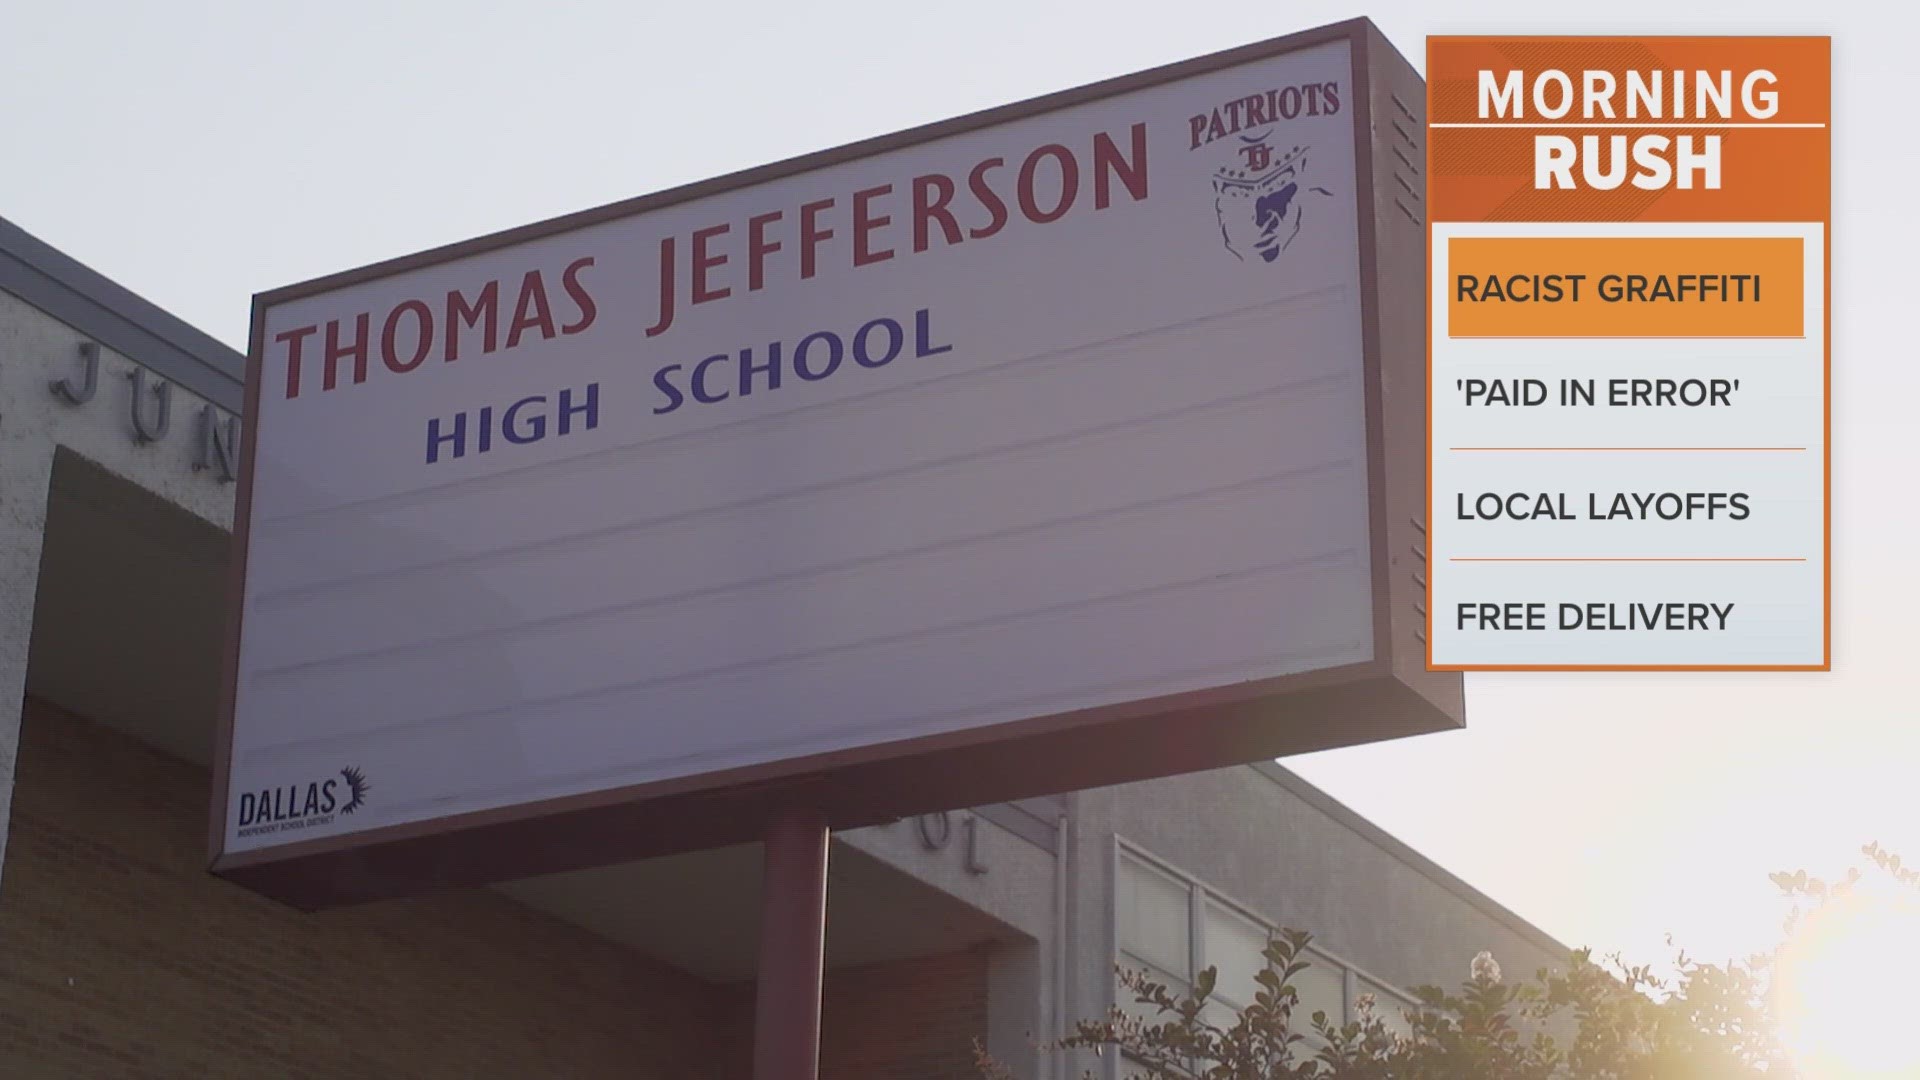 School officials notified parents about swastika graffiti and racial slurs discovered in the Thomas Jefferson High School bathroom.